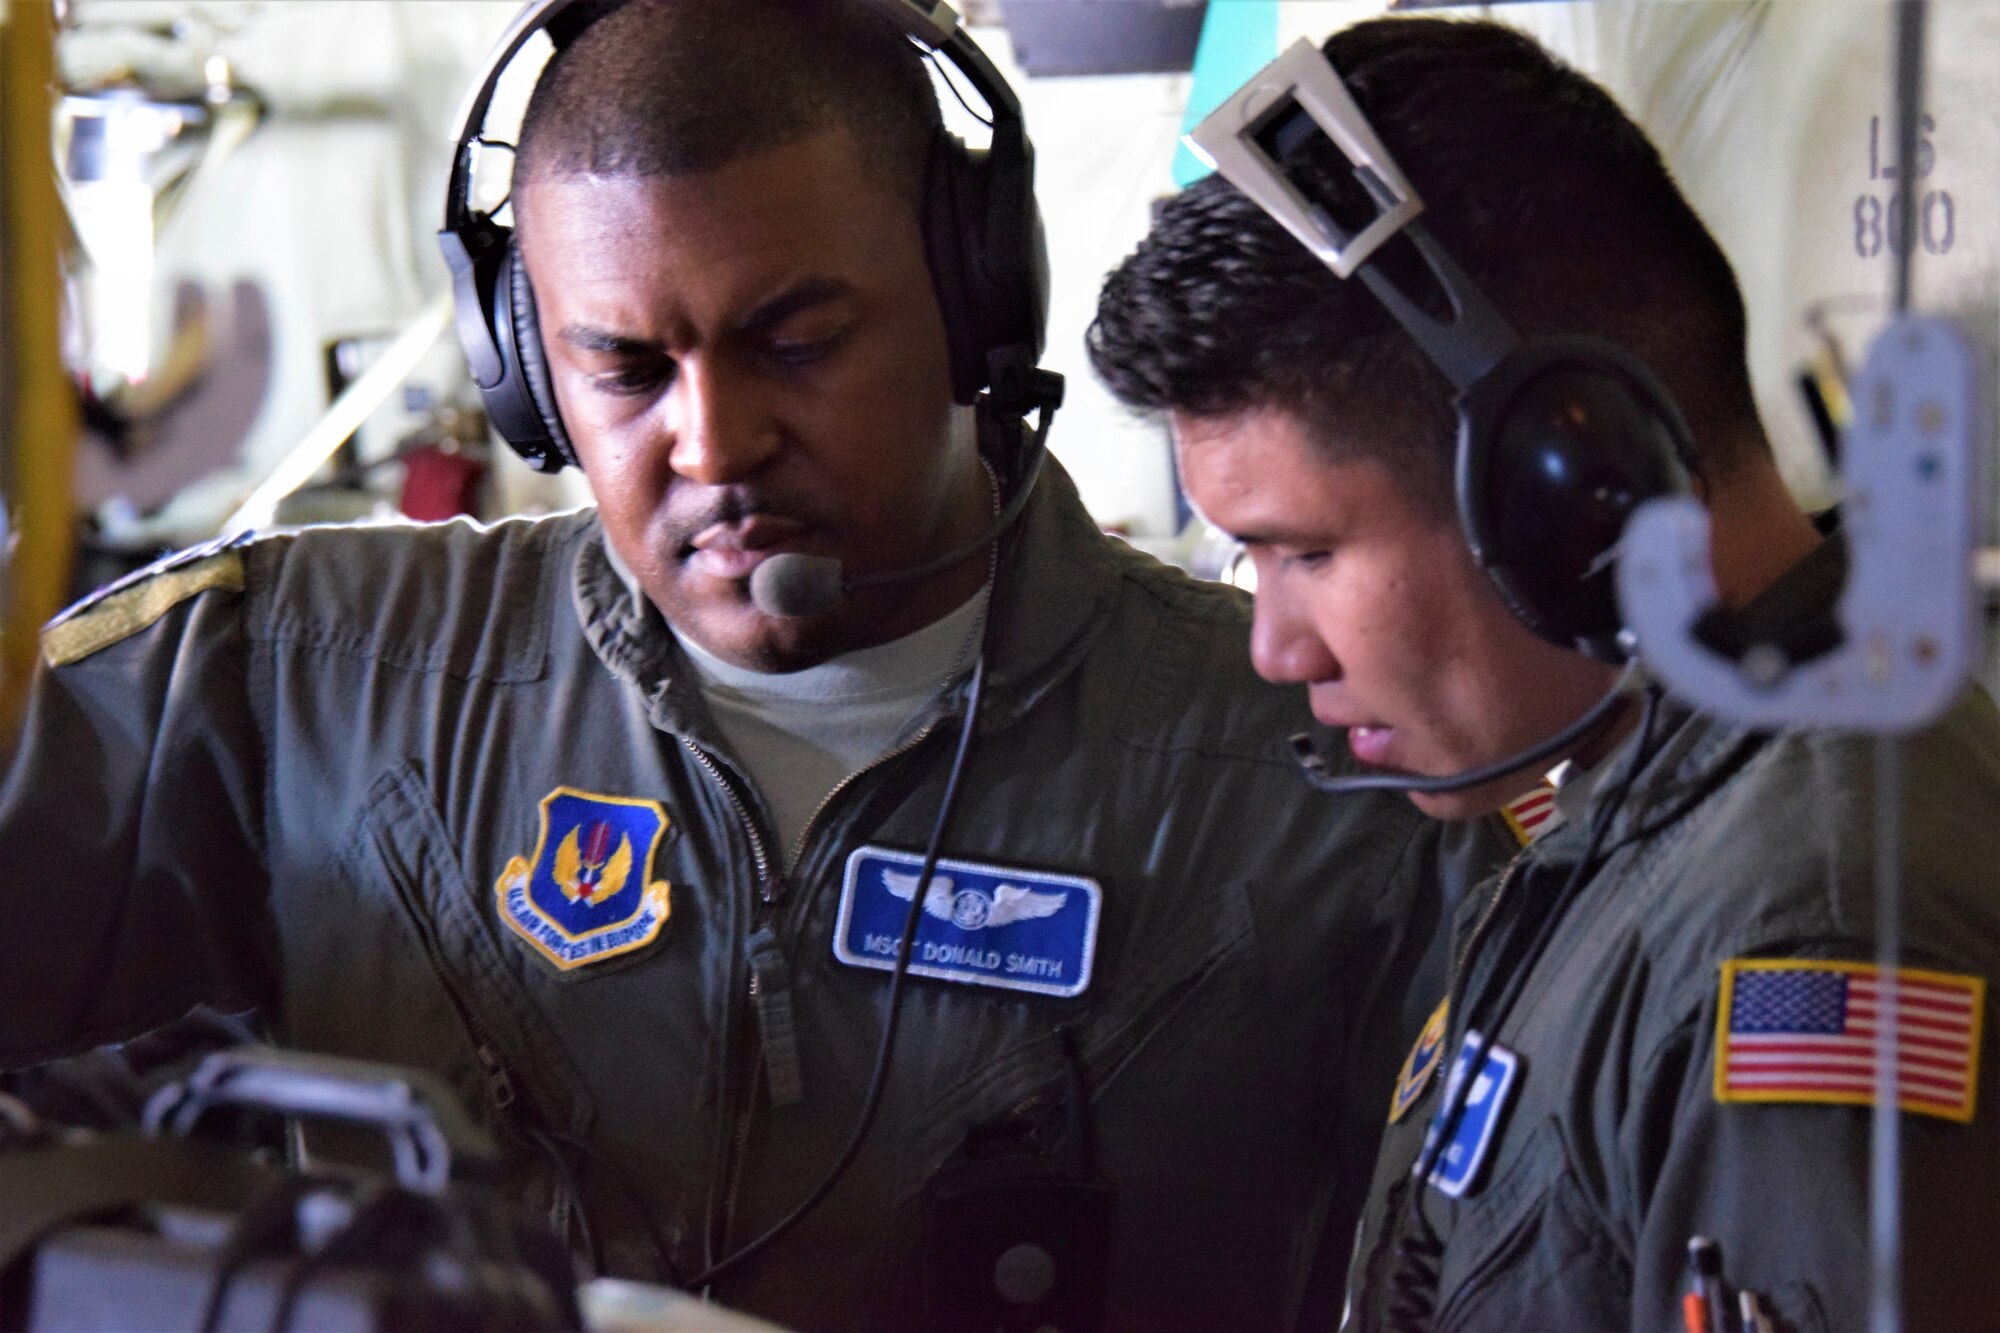 U.S Air Force personnel during aeromedical training mission.